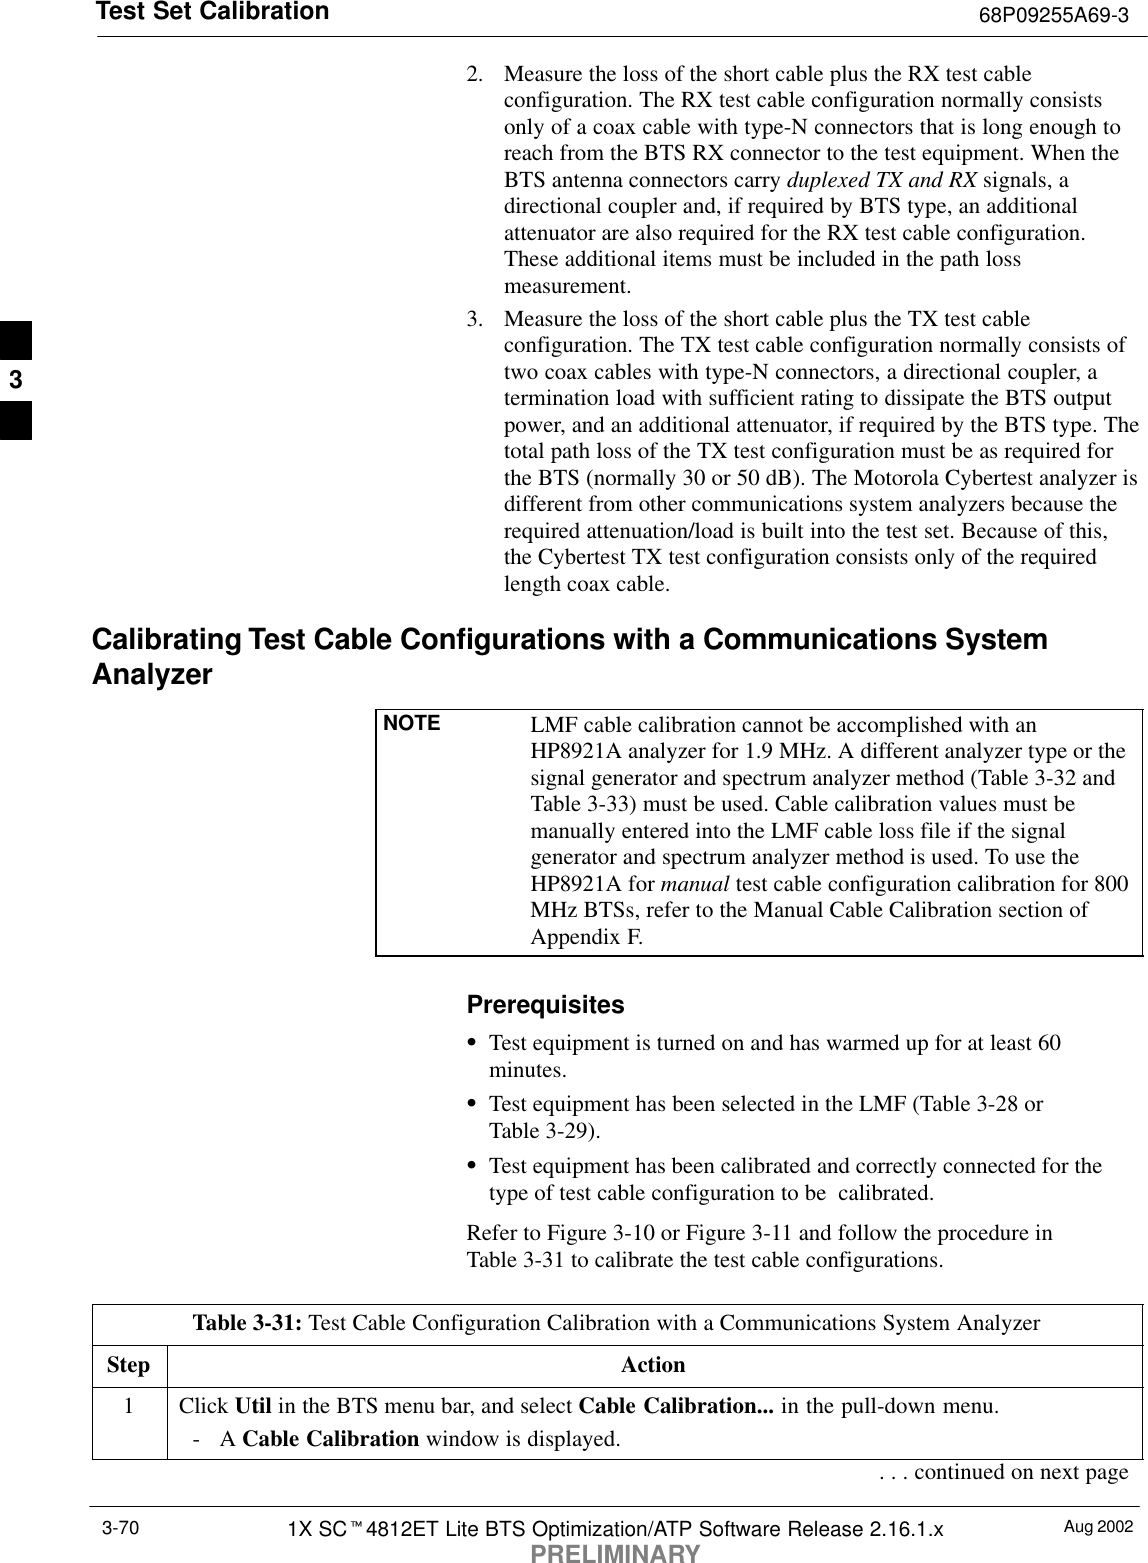 Test Set Calibration 68P09255A69-3Aug 20021X SCt4812ET Lite BTS Optimization/ATP Software Release 2.16.1.xPRELIMINARY3-702. Measure the loss of the short cable plus the RX test cableconfiguration. The RX test cable configuration normally consistsonly of a coax cable with type-N connectors that is long enough toreach from the BTS RX connector to the test equipment. When theBTS antenna connectors carry duplexed TX and RX signals, adirectional coupler and, if required by BTS type, an additionalattenuator are also required for the RX test cable configuration.These additional items must be included in the path lossmeasurement.3. Measure the loss of the short cable plus the TX test cableconfiguration. The TX test cable configuration normally consists oftwo coax cables with type-N connectors, a directional coupler, atermination load with sufficient rating to dissipate the BTS outputpower, and an additional attenuator, if required by the BTS type. Thetotal path loss of the TX test configuration must be as required forthe BTS (normally 30 or 50 dB). The Motorola Cybertest analyzer isdifferent from other communications system analyzers because therequired attenuation/load is built into the test set. Because of this,the Cybertest TX test configuration consists only of the requiredlength coax cable.Calibrating Test Cable Configurations with a Communications SystemAnalyzerNOTE LMF cable calibration cannot be accomplished with anHP8921A analyzer for 1.9 MHz. A different analyzer type or thesignal generator and spectrum analyzer method (Table 3-32 andTable 3-33) must be used. Cable calibration values must bemanually entered into the LMF cable loss file if the signalgenerator and spectrum analyzer method is used. To use theHP8921A for manual test cable configuration calibration for 800MHz BTSs, refer to the Manual Cable Calibration section ofAppendix F.PrerequisitesSTest equipment is turned on and has warmed up for at least 60minutes.STest equipment has been selected in the LMF (Table 3-28 orTable 3-29).STest equipment has been calibrated and correctly connected for thetype of test cable configuration to be  calibrated.Refer to Figure 3-10 or Figure 3-11 and follow the procedure inTable 3-31 to calibrate the test cable configurations.Table 3-31: Test Cable Configuration Calibration with a Communications System AnalyzerStep Action1 Click Util in the BTS menu bar, and select Cable Calibration... in the pull-down menu.-A Cable Calibration window is displayed.. . . continued on next page3